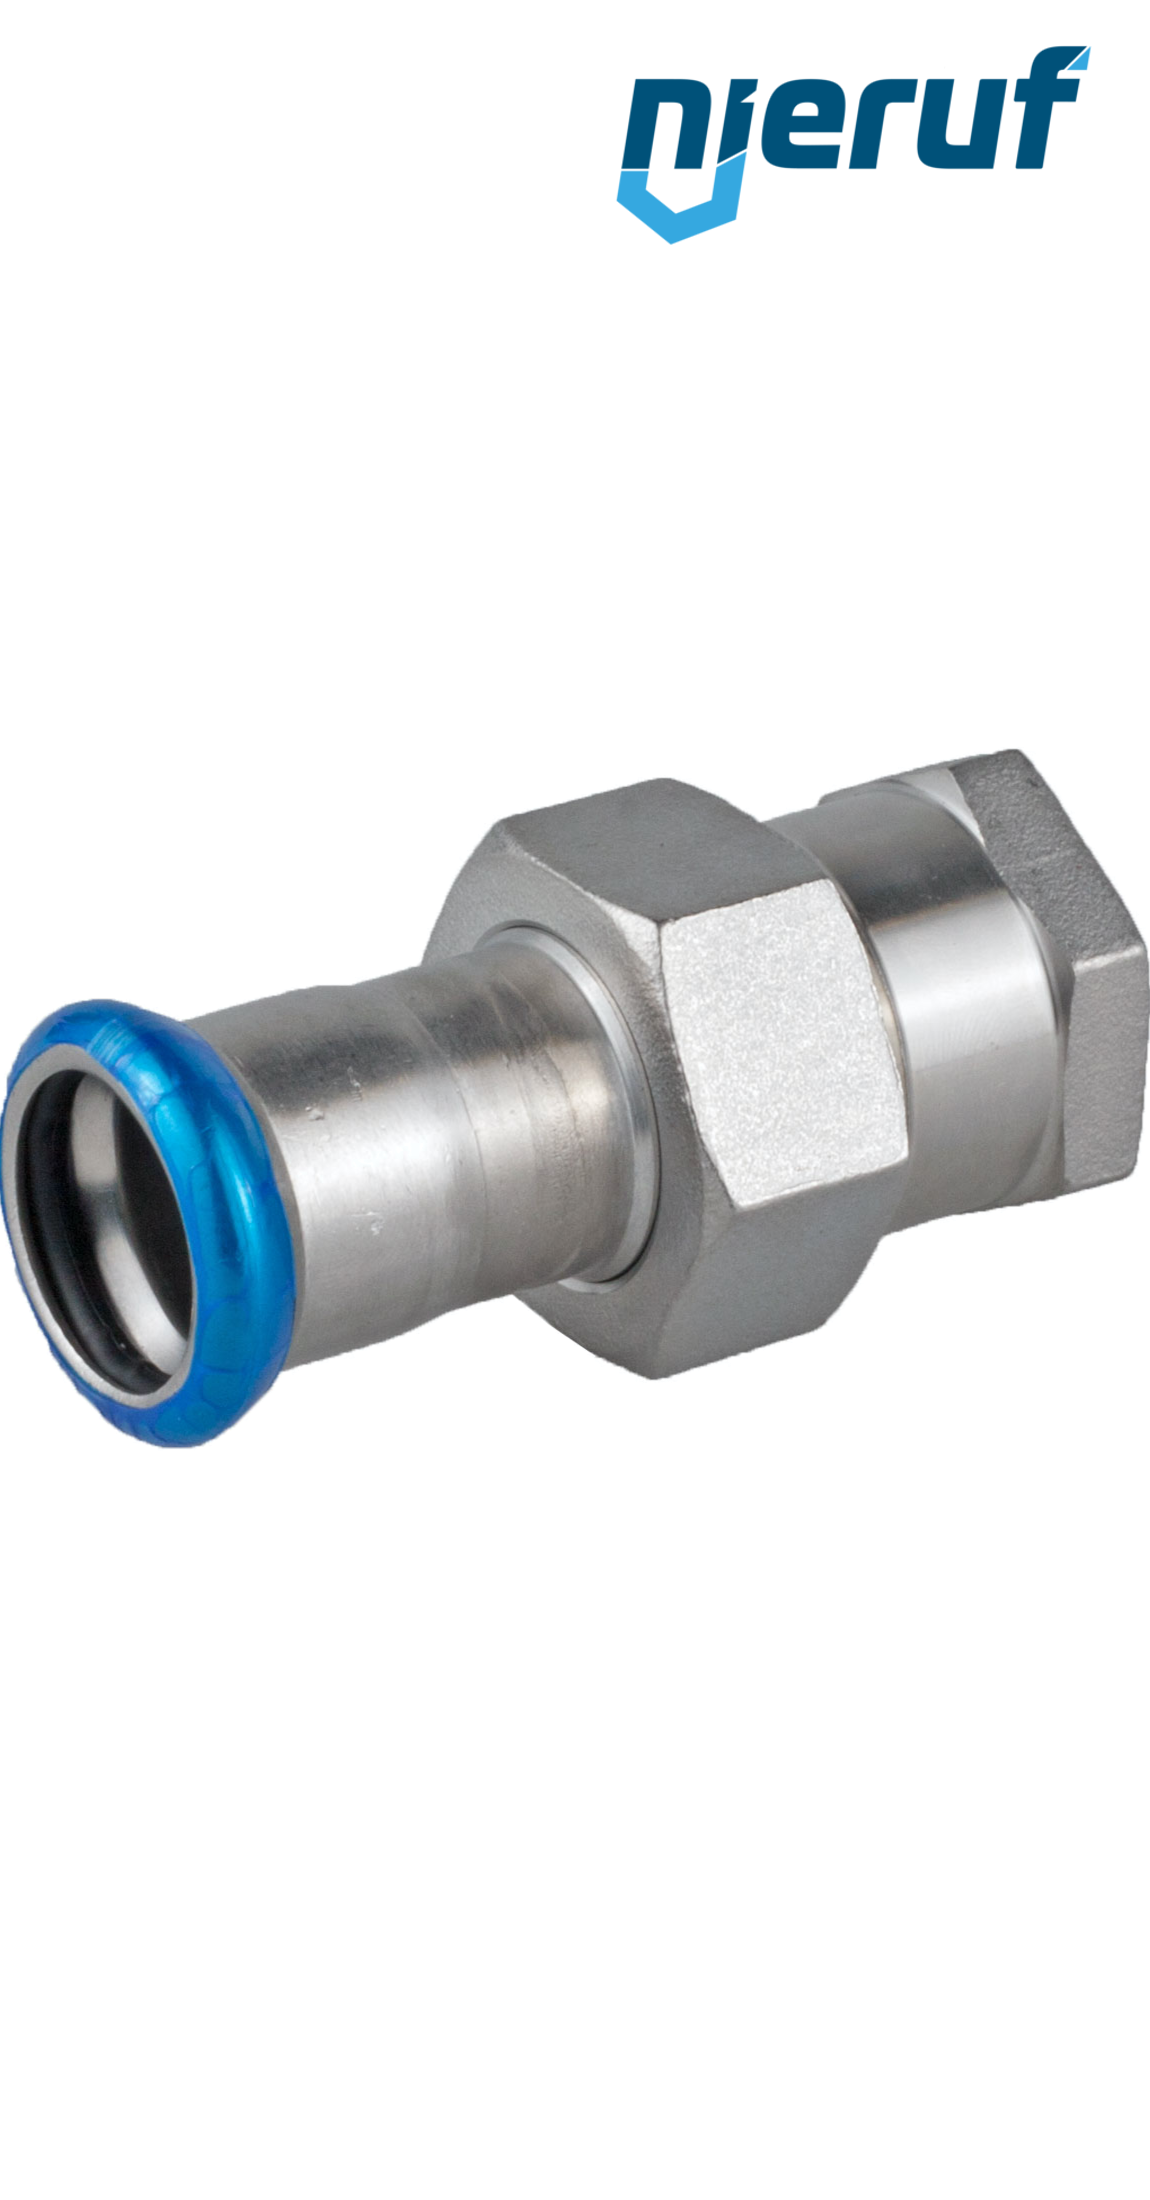 Union Coupling Pressfitting F DN25 - 28,0 mm female thread 1" inch stainless steel